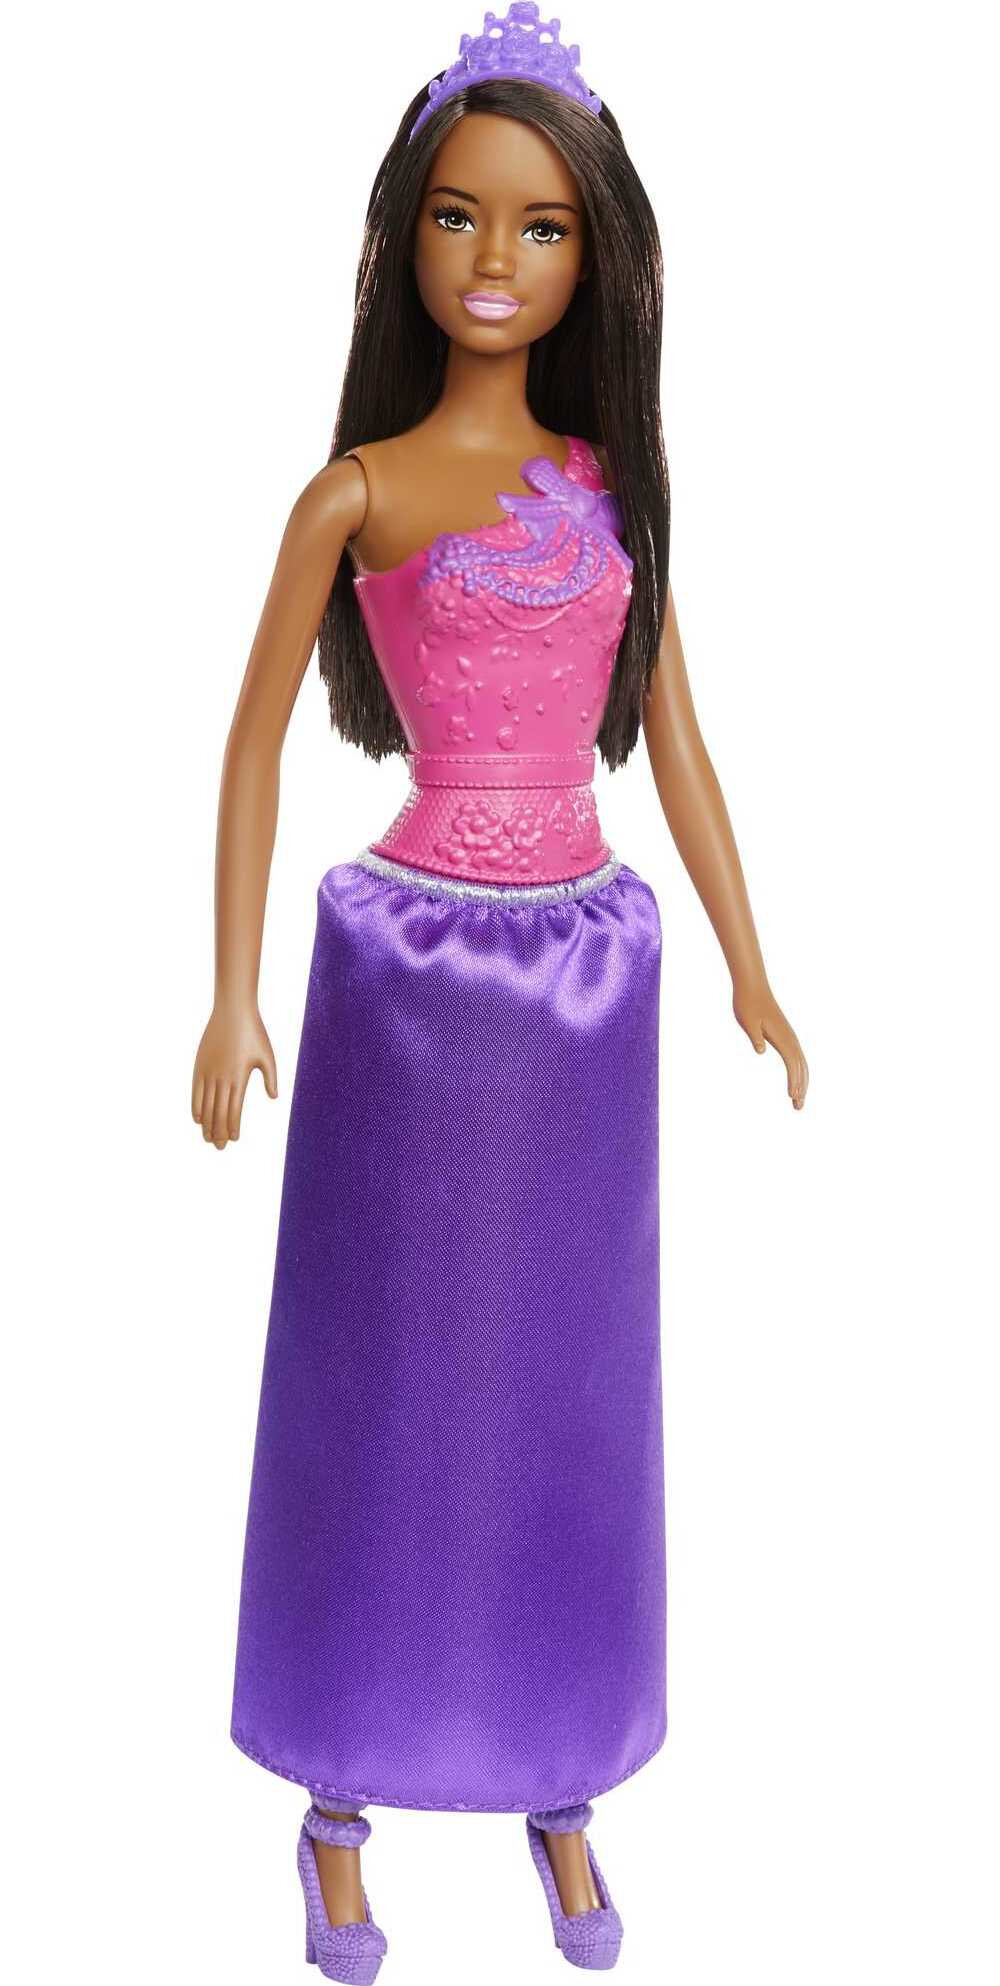 Barbie Dreamtopia Royal Doll, Royal Brunette with Purple Removable Skirt & Accessories - image 5 of 6